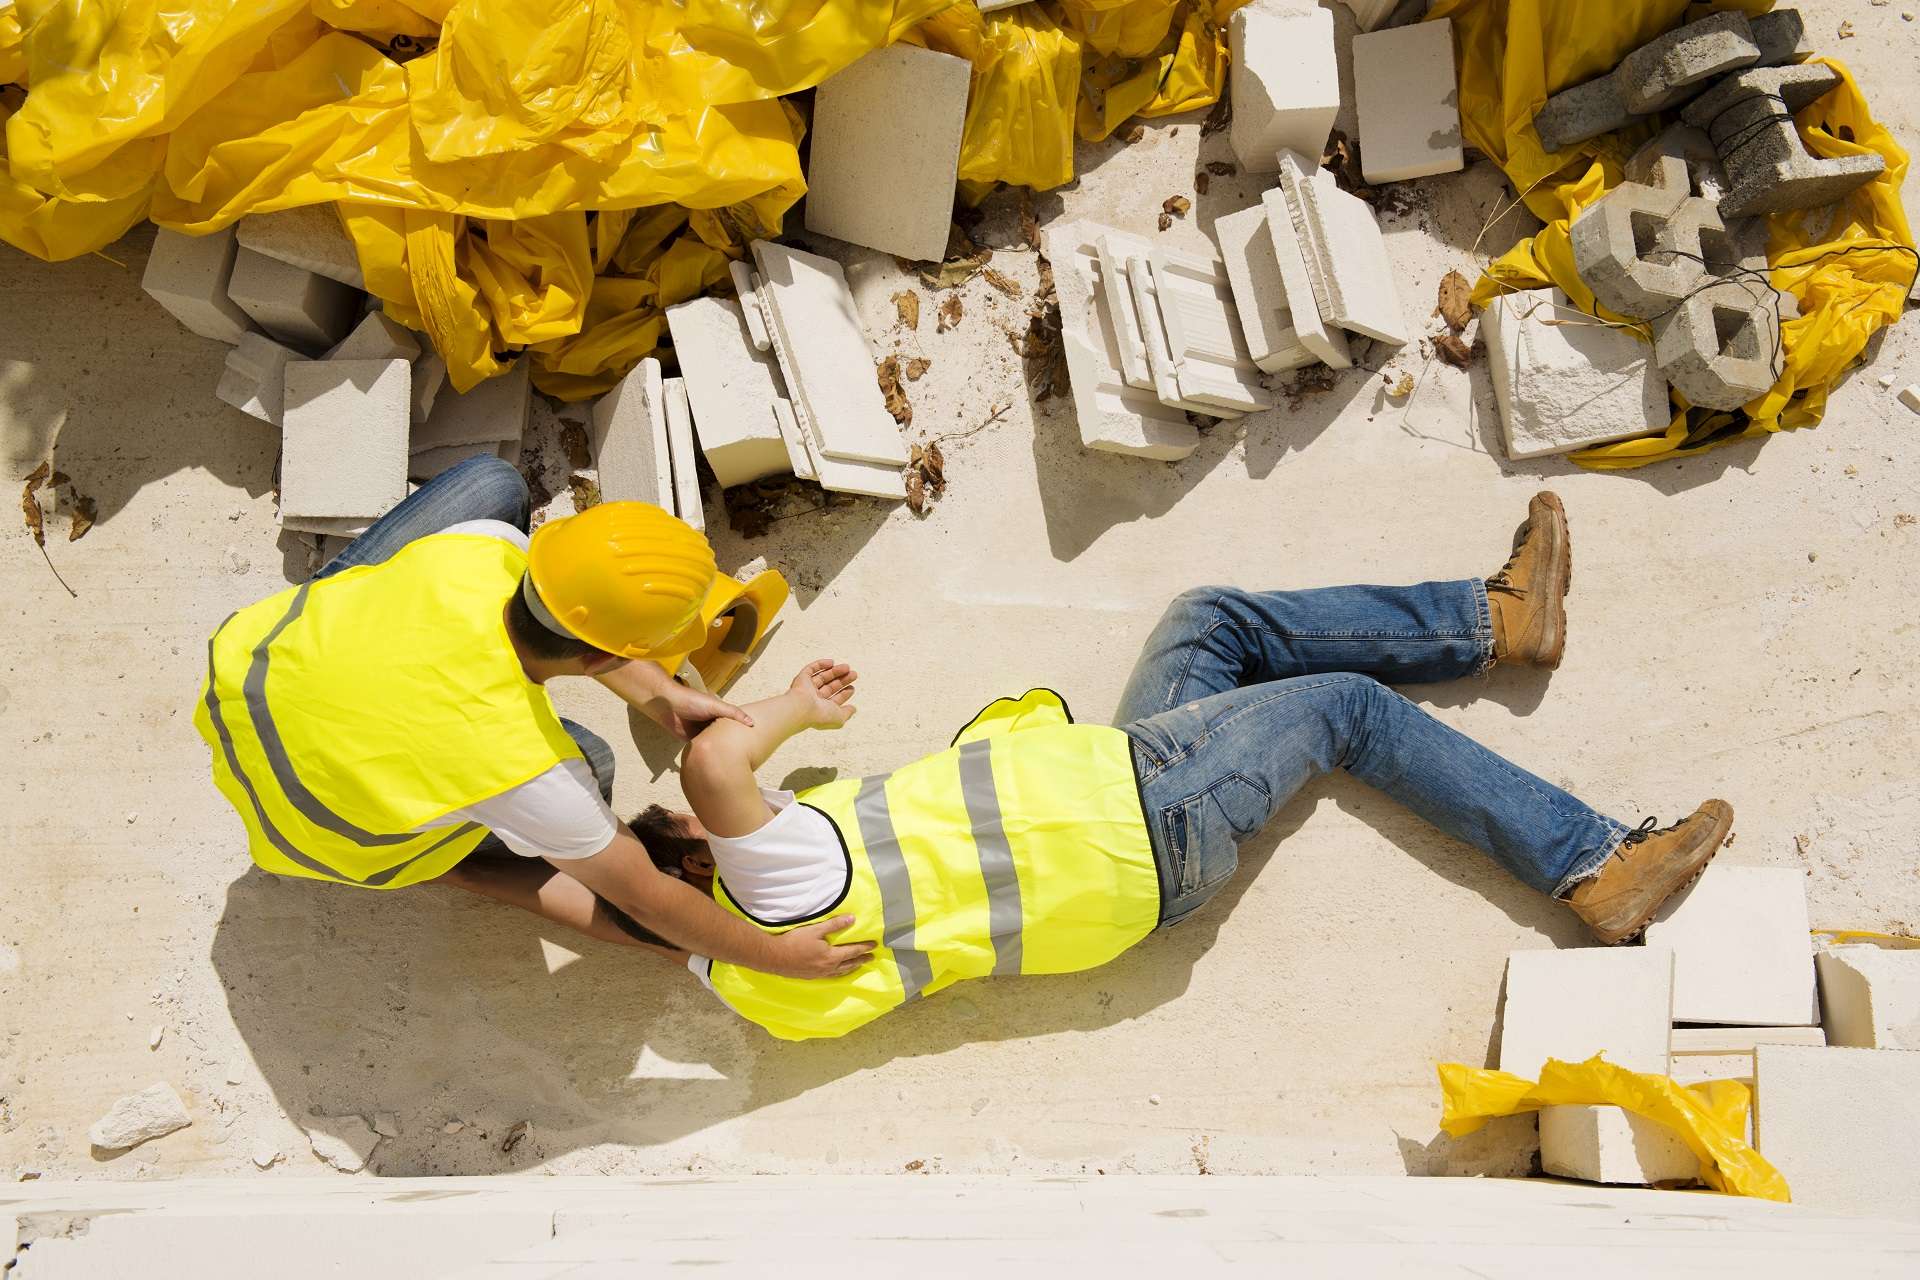 floridas workers compensation act